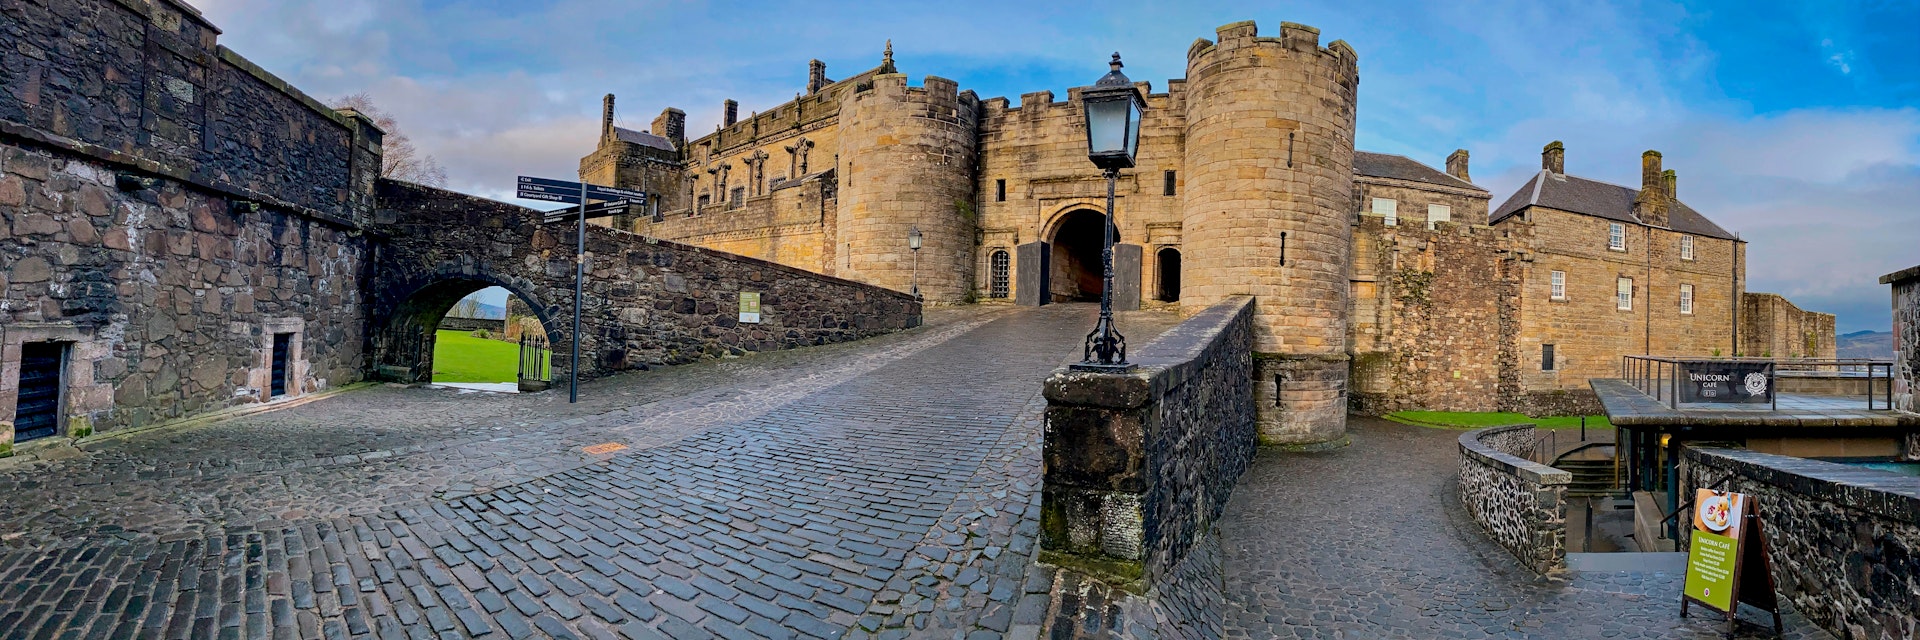 Stirling, Scotland, United Kingdom – December 20, 2019: Stirling Castle is a fortified wall sitting atop Castle Hill and is part of the Stirling Sill, a quartz-dolerite formation millions of years old. Records date it back to the early 12th century and the inner grounds are home to replicas of the famous Unicorn Tapestries. The castle offers spectacular views of Stirling from the Outer Defences.